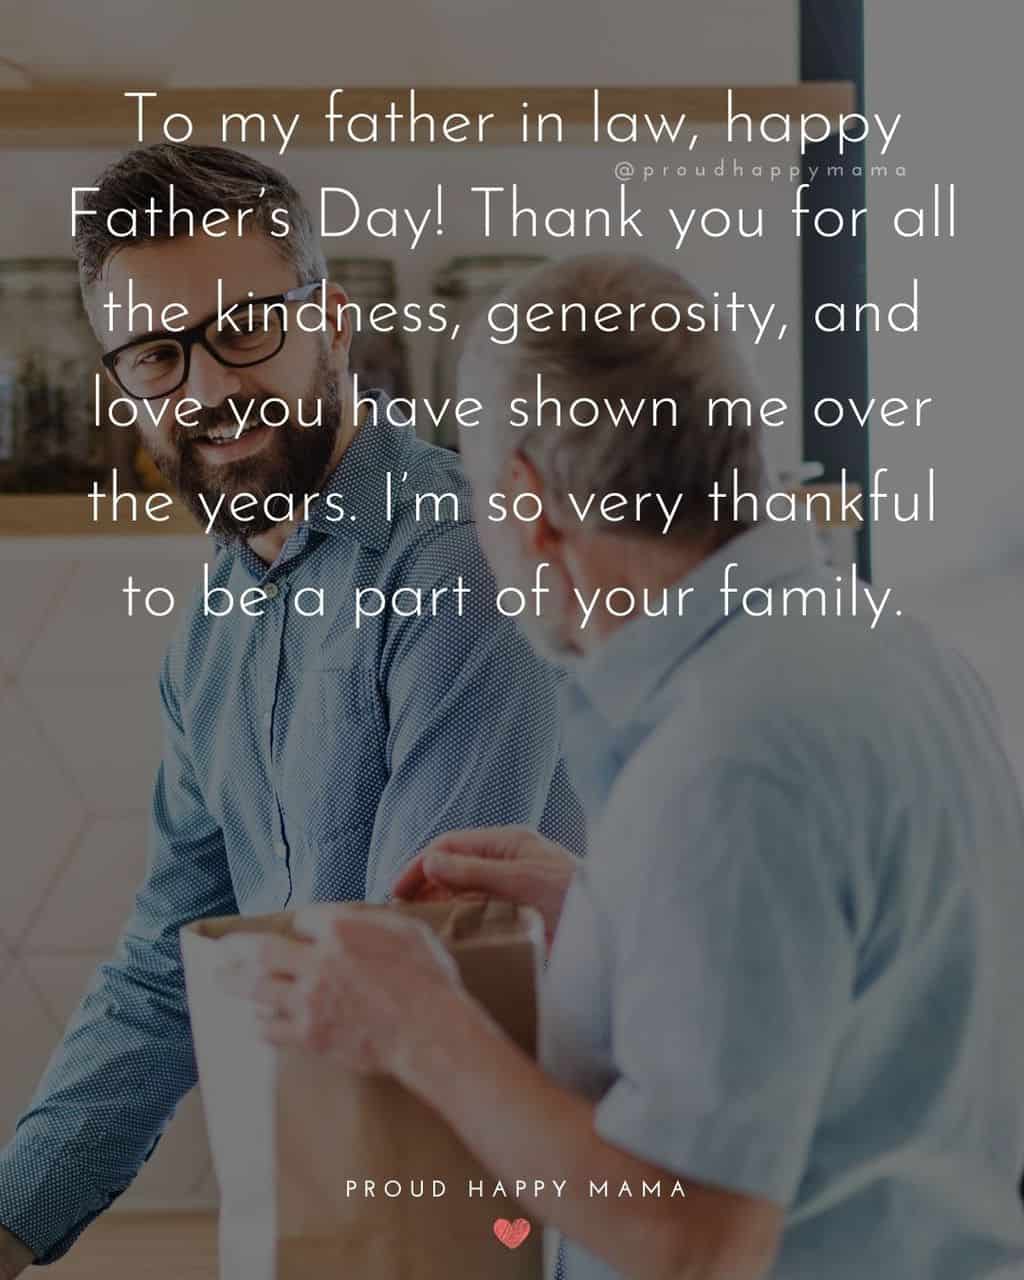 Happy Fathers Day Quotes For Father In Law - To my father in law, happy Father’s Day! Thank you for all the kindness,